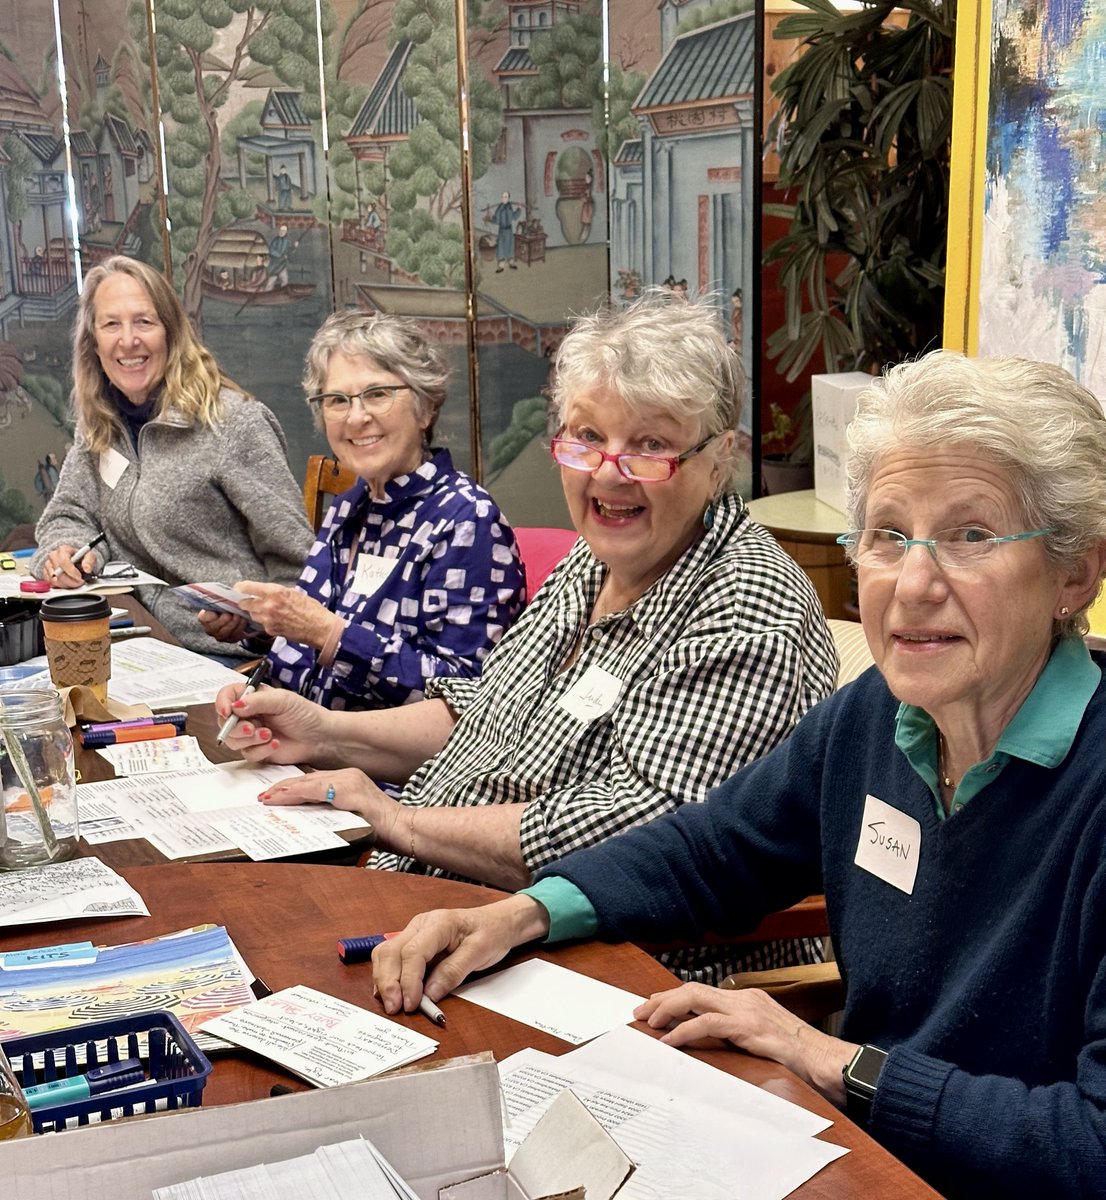 ☕️ Each month, members of @ThirdActSFBay gather at a cozy local cafe to pen postcards and relish in the camaraderie.

You can join the festivities by contacting our working groups, messaging us, or starting your own postcard party! Learn more: thirdact.org/act/write-post…

#democracy